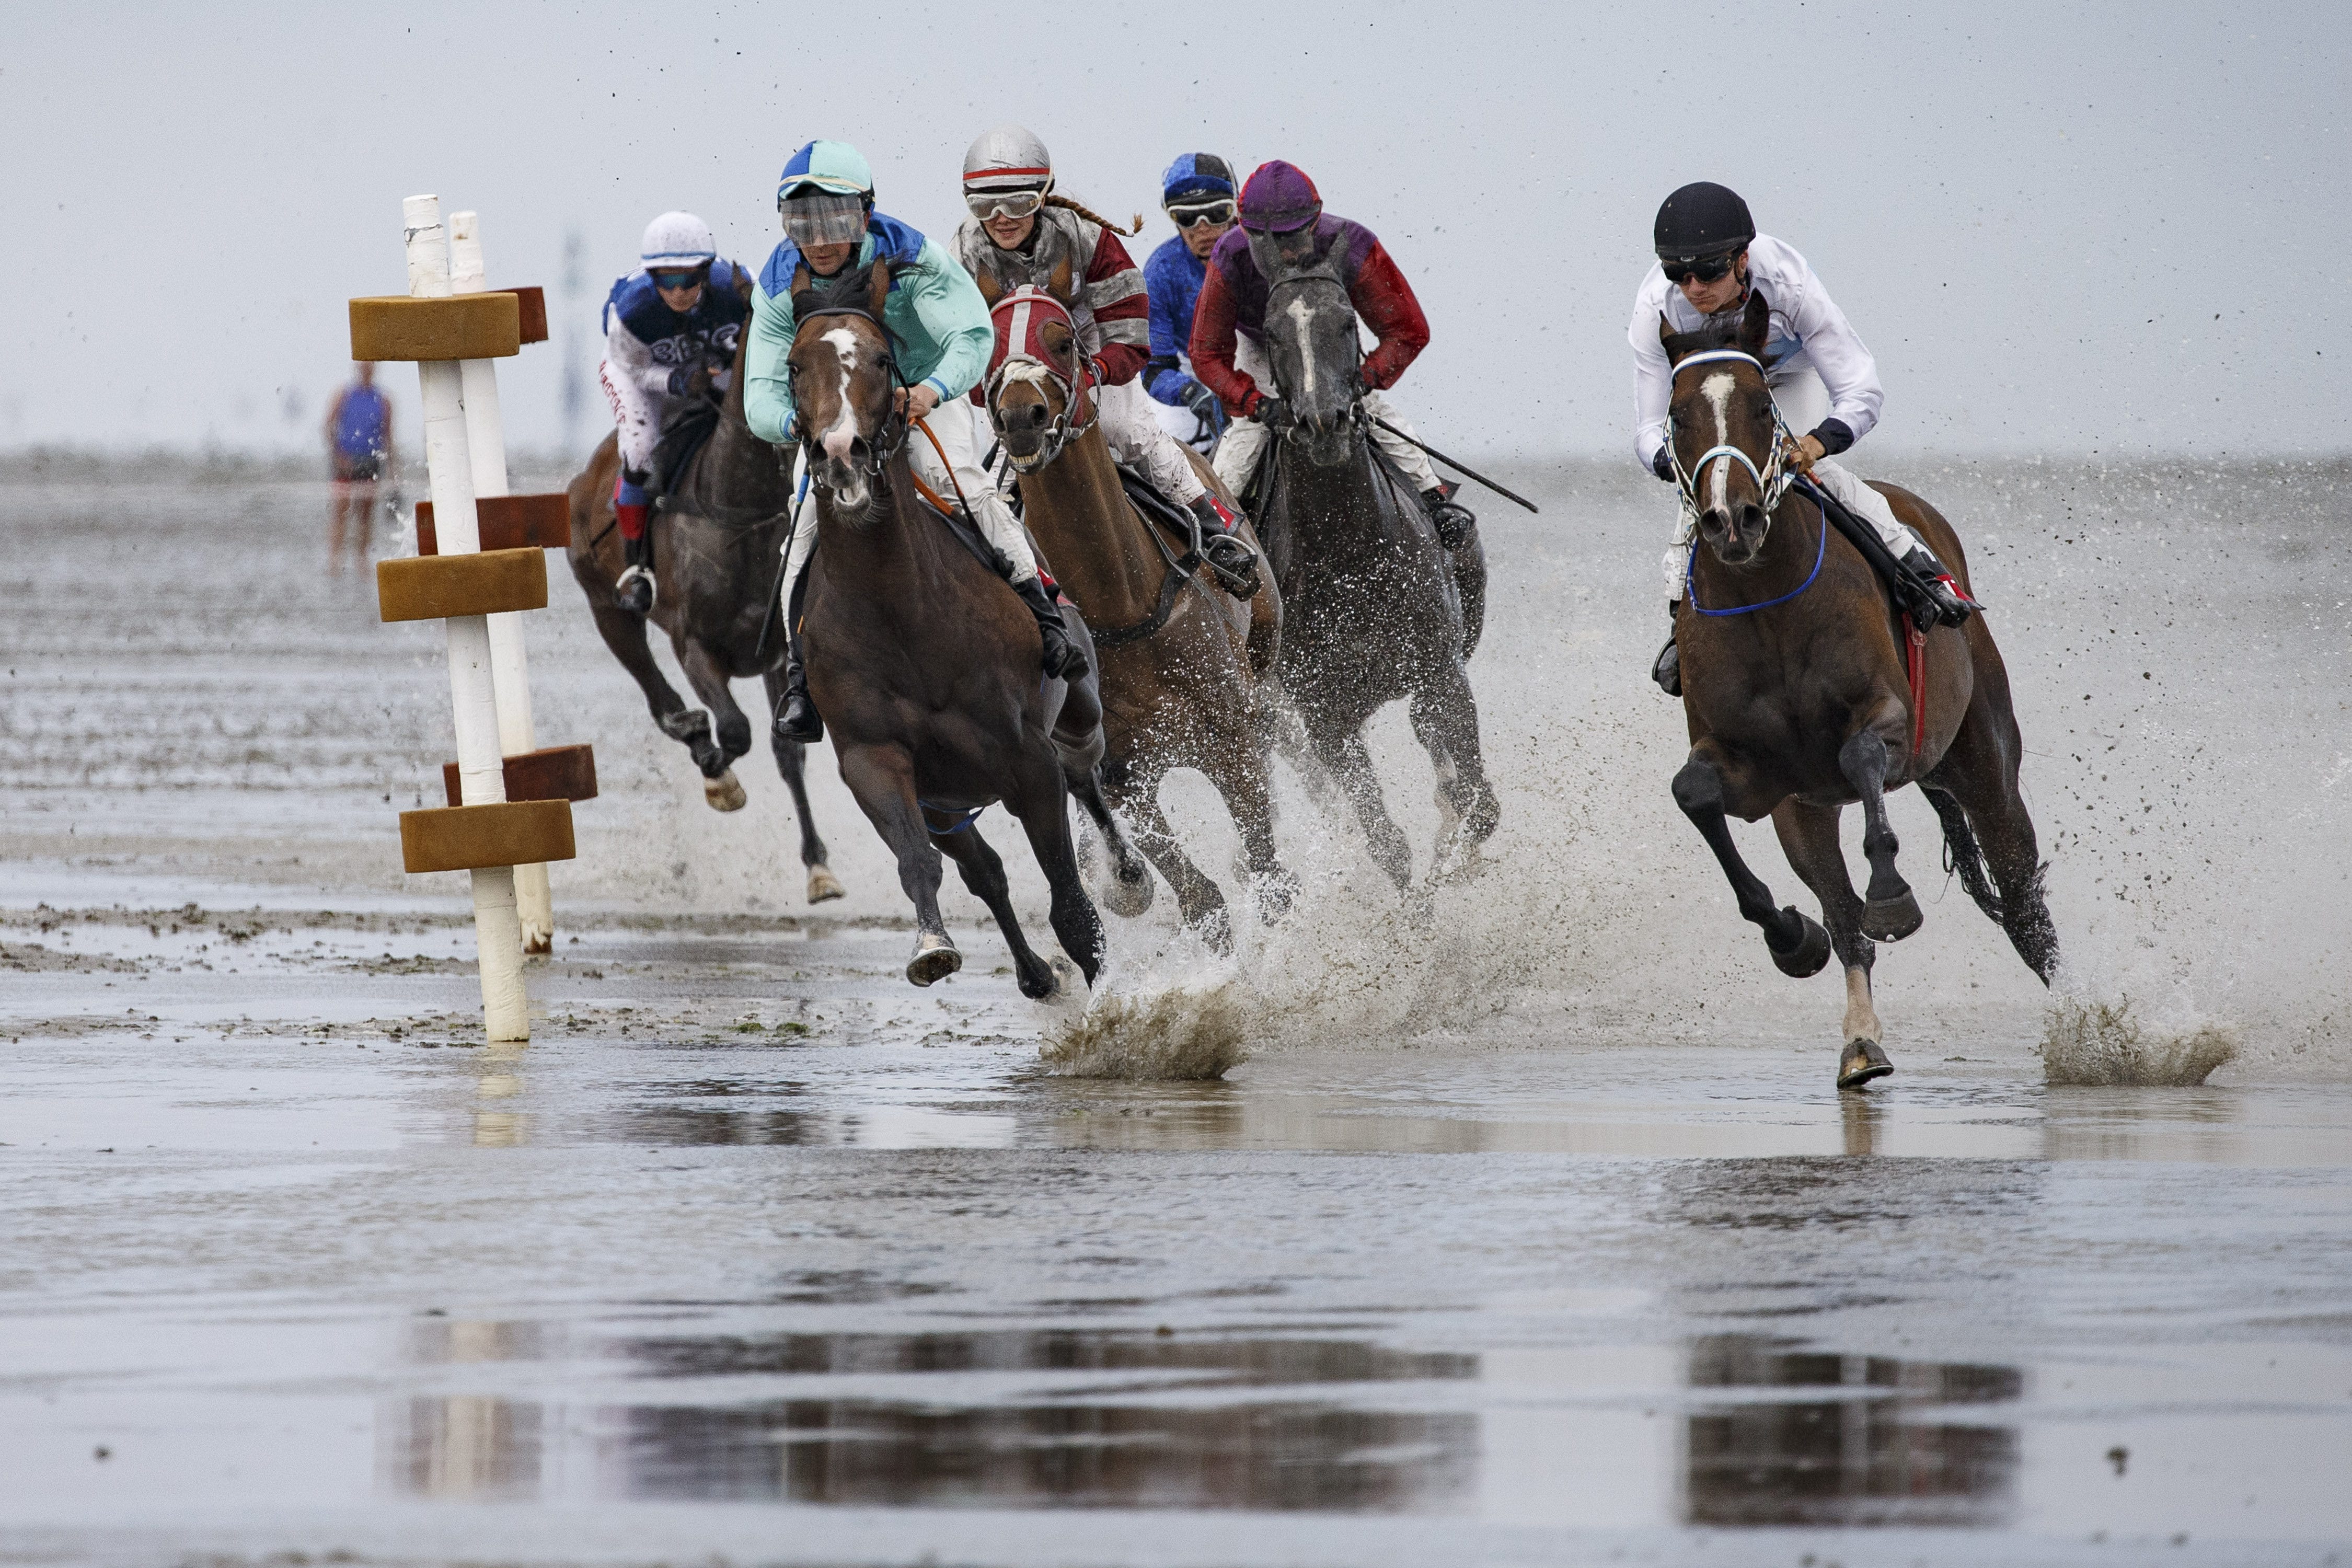 Horses and riders compete in the annual horse buggy races on the mudflats at Duhnen in Cuxhaven, Germany. The races, which in German are known as the Duhner Wattrennen, take place at low tide throughout the day and have been an annual tradition since